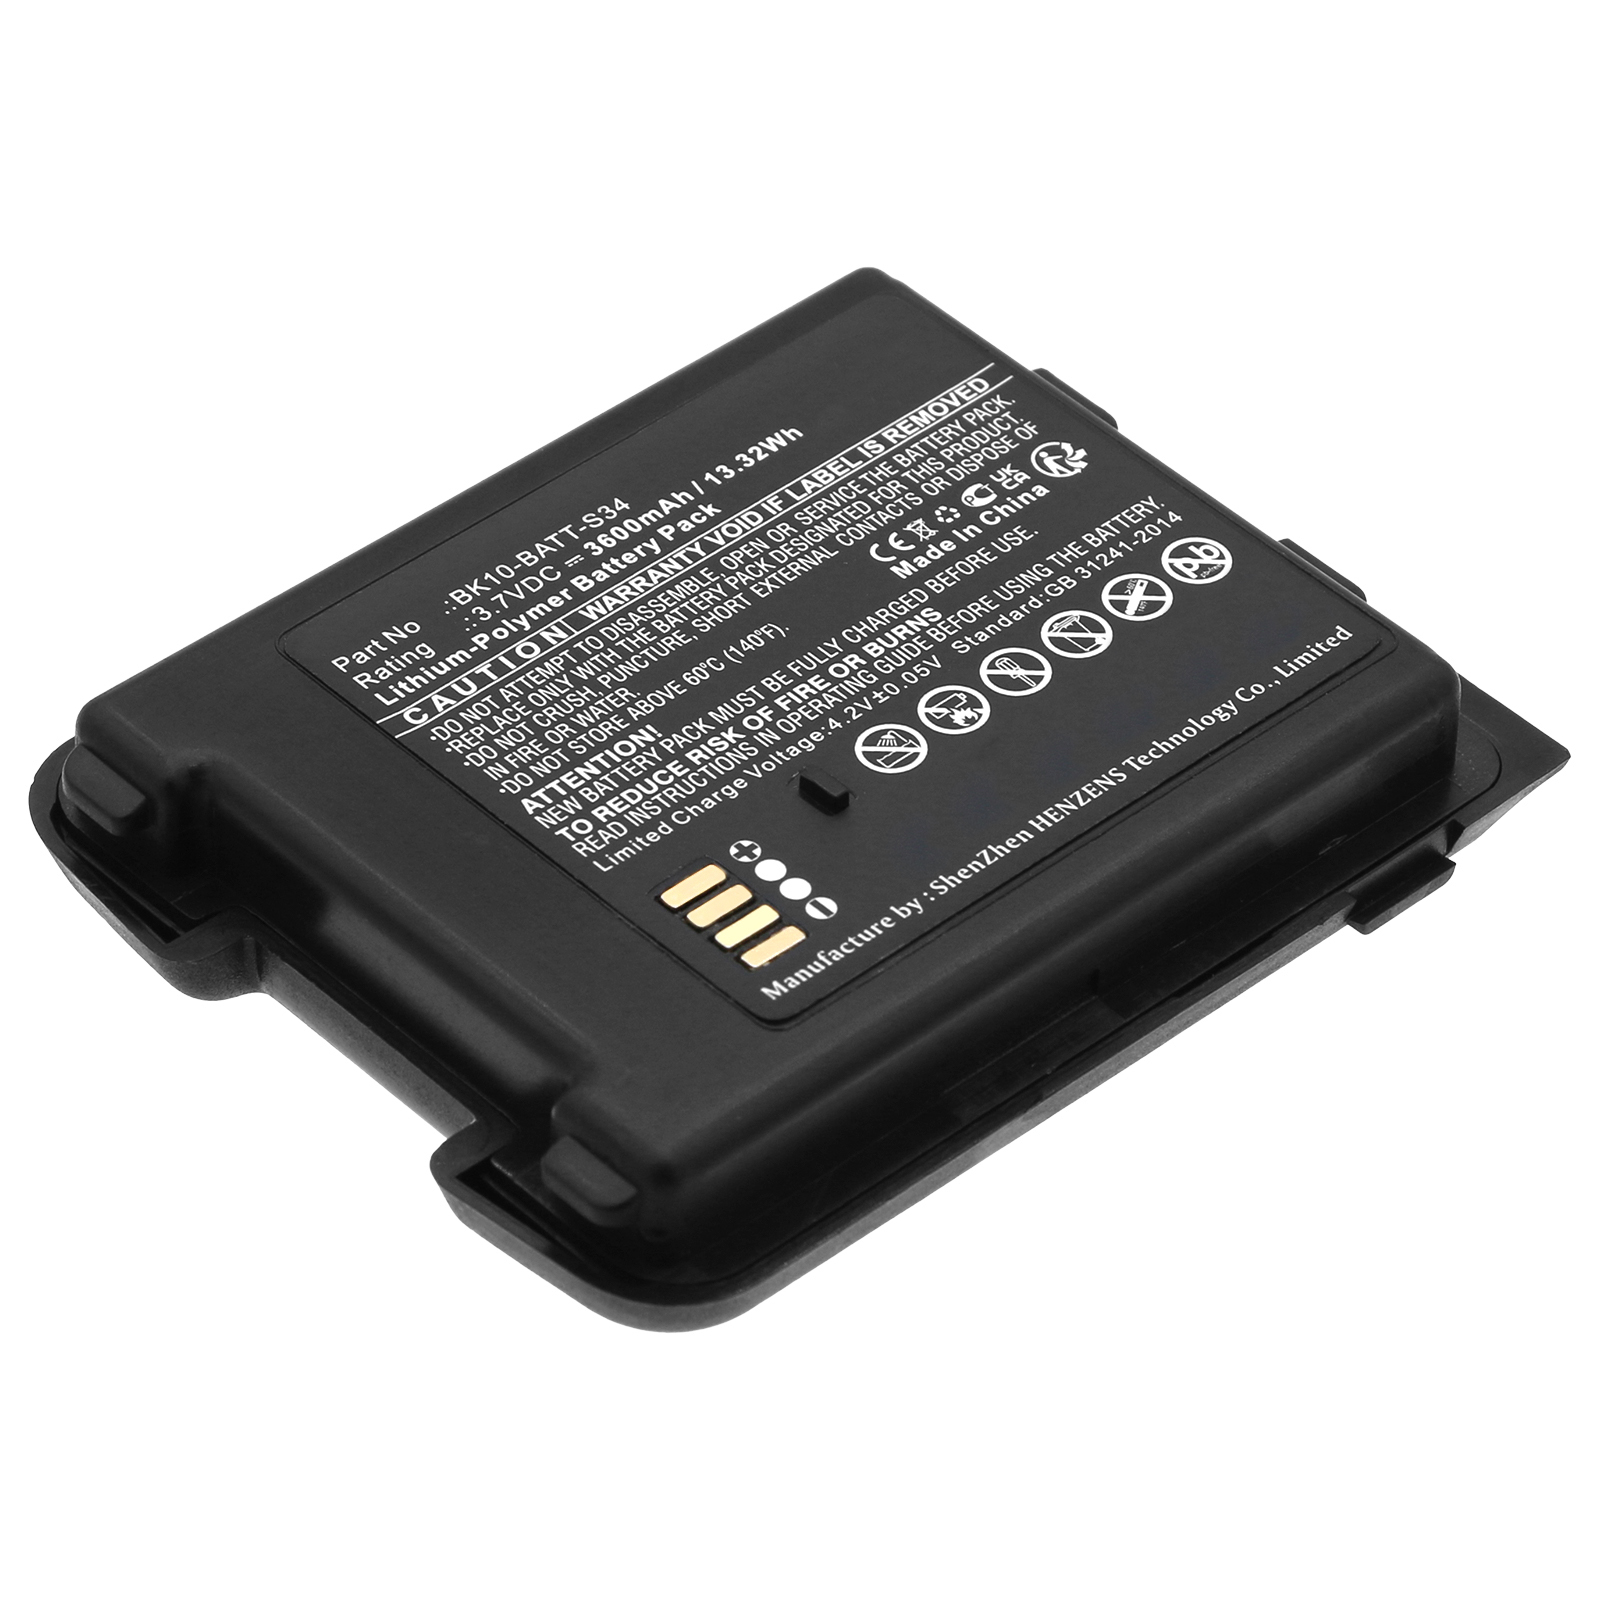 Batteries for M3 MobileBarcode Scanner